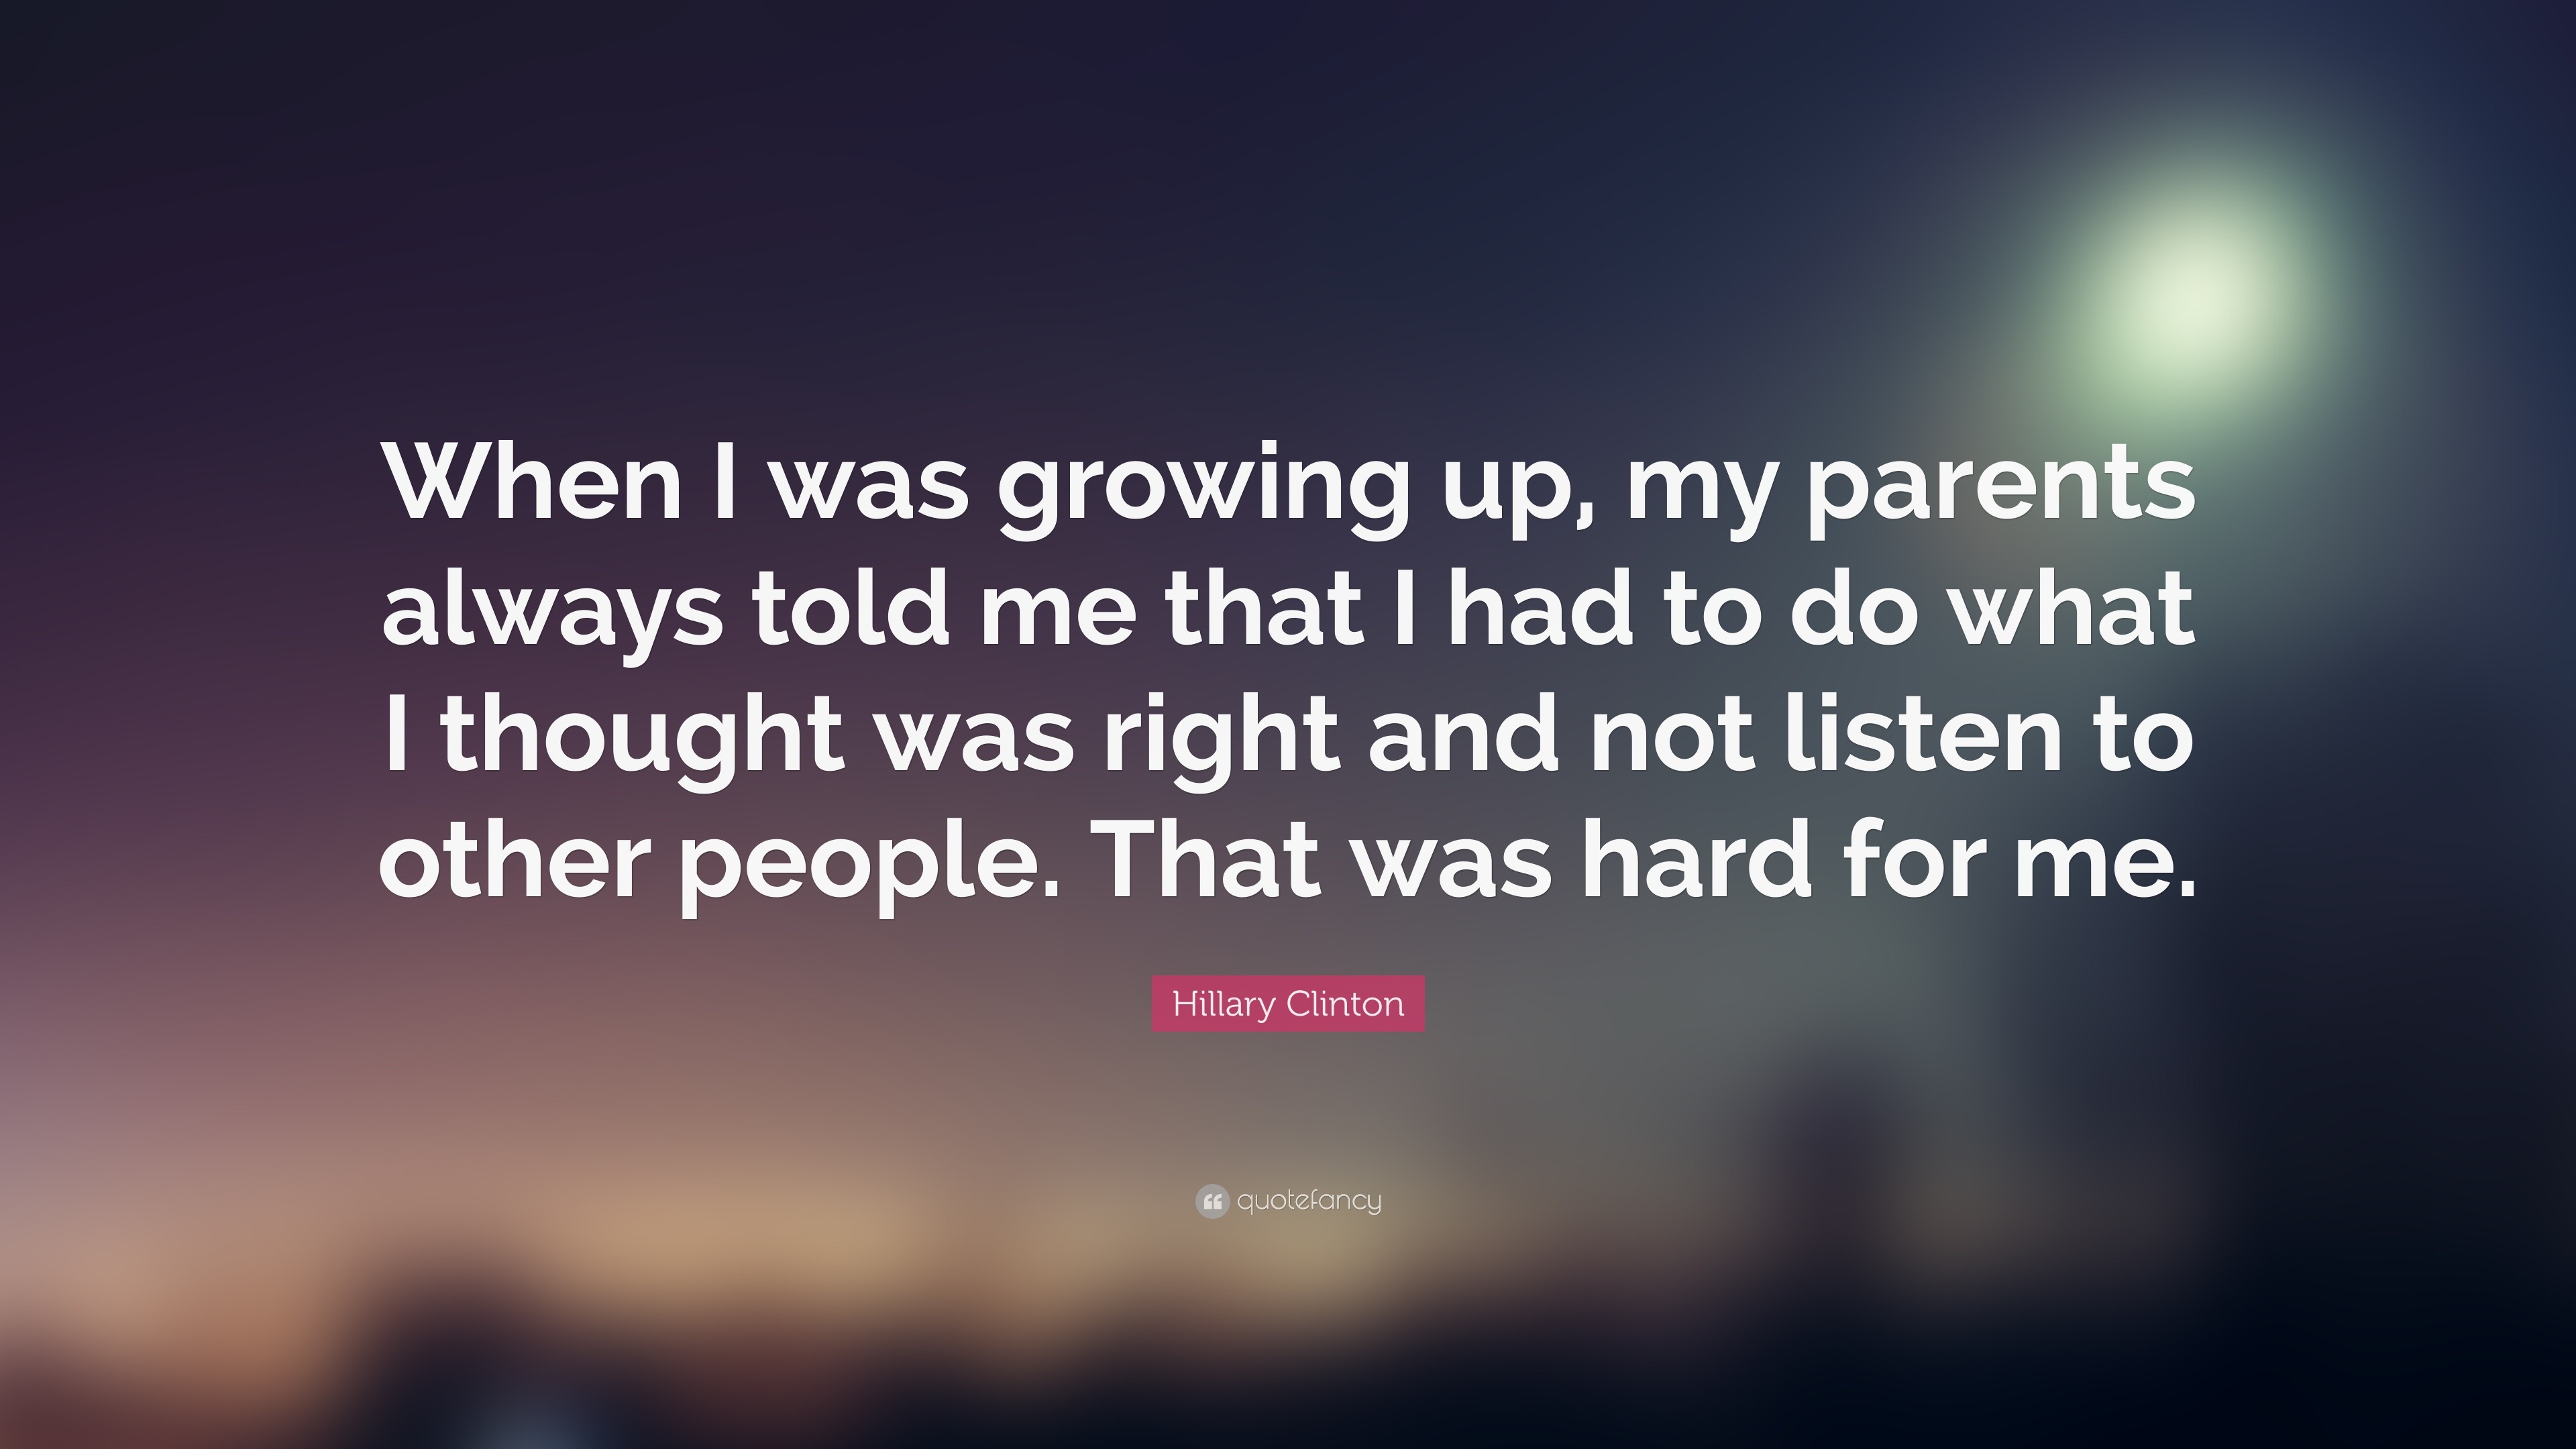 Hillary Clinton Quote: “When I was growing up, my parents always told ...